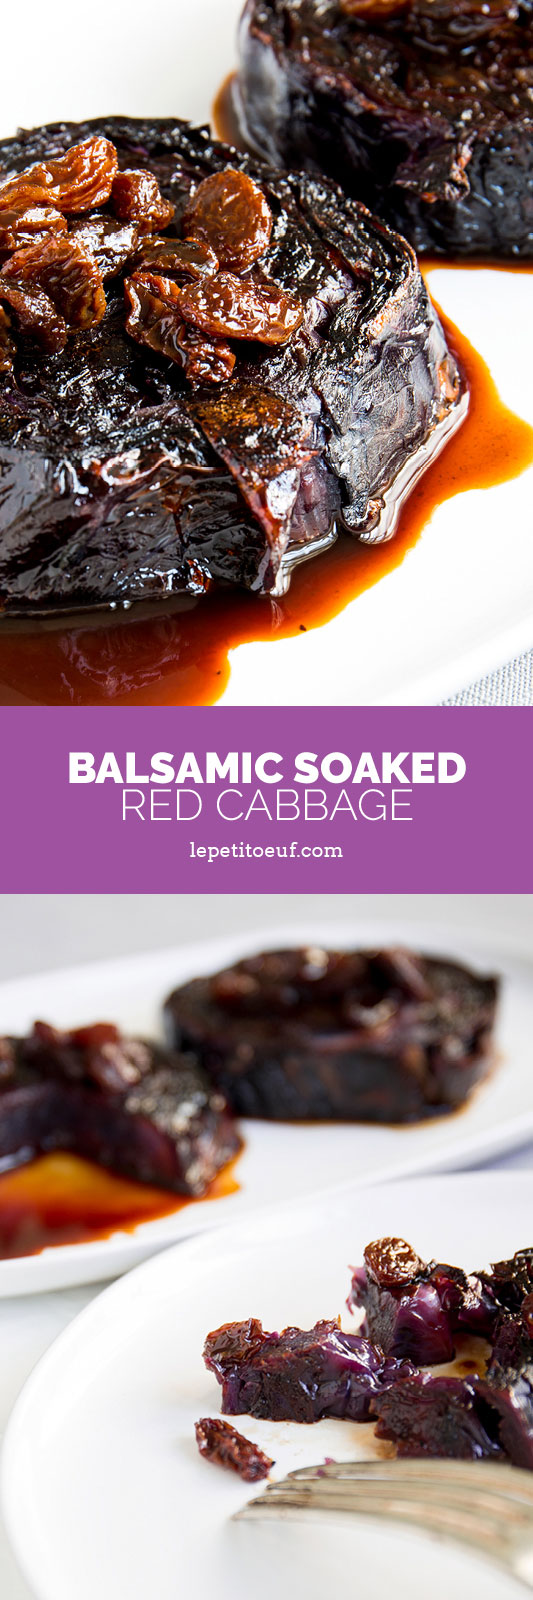 Balsamic soaked red cabbage